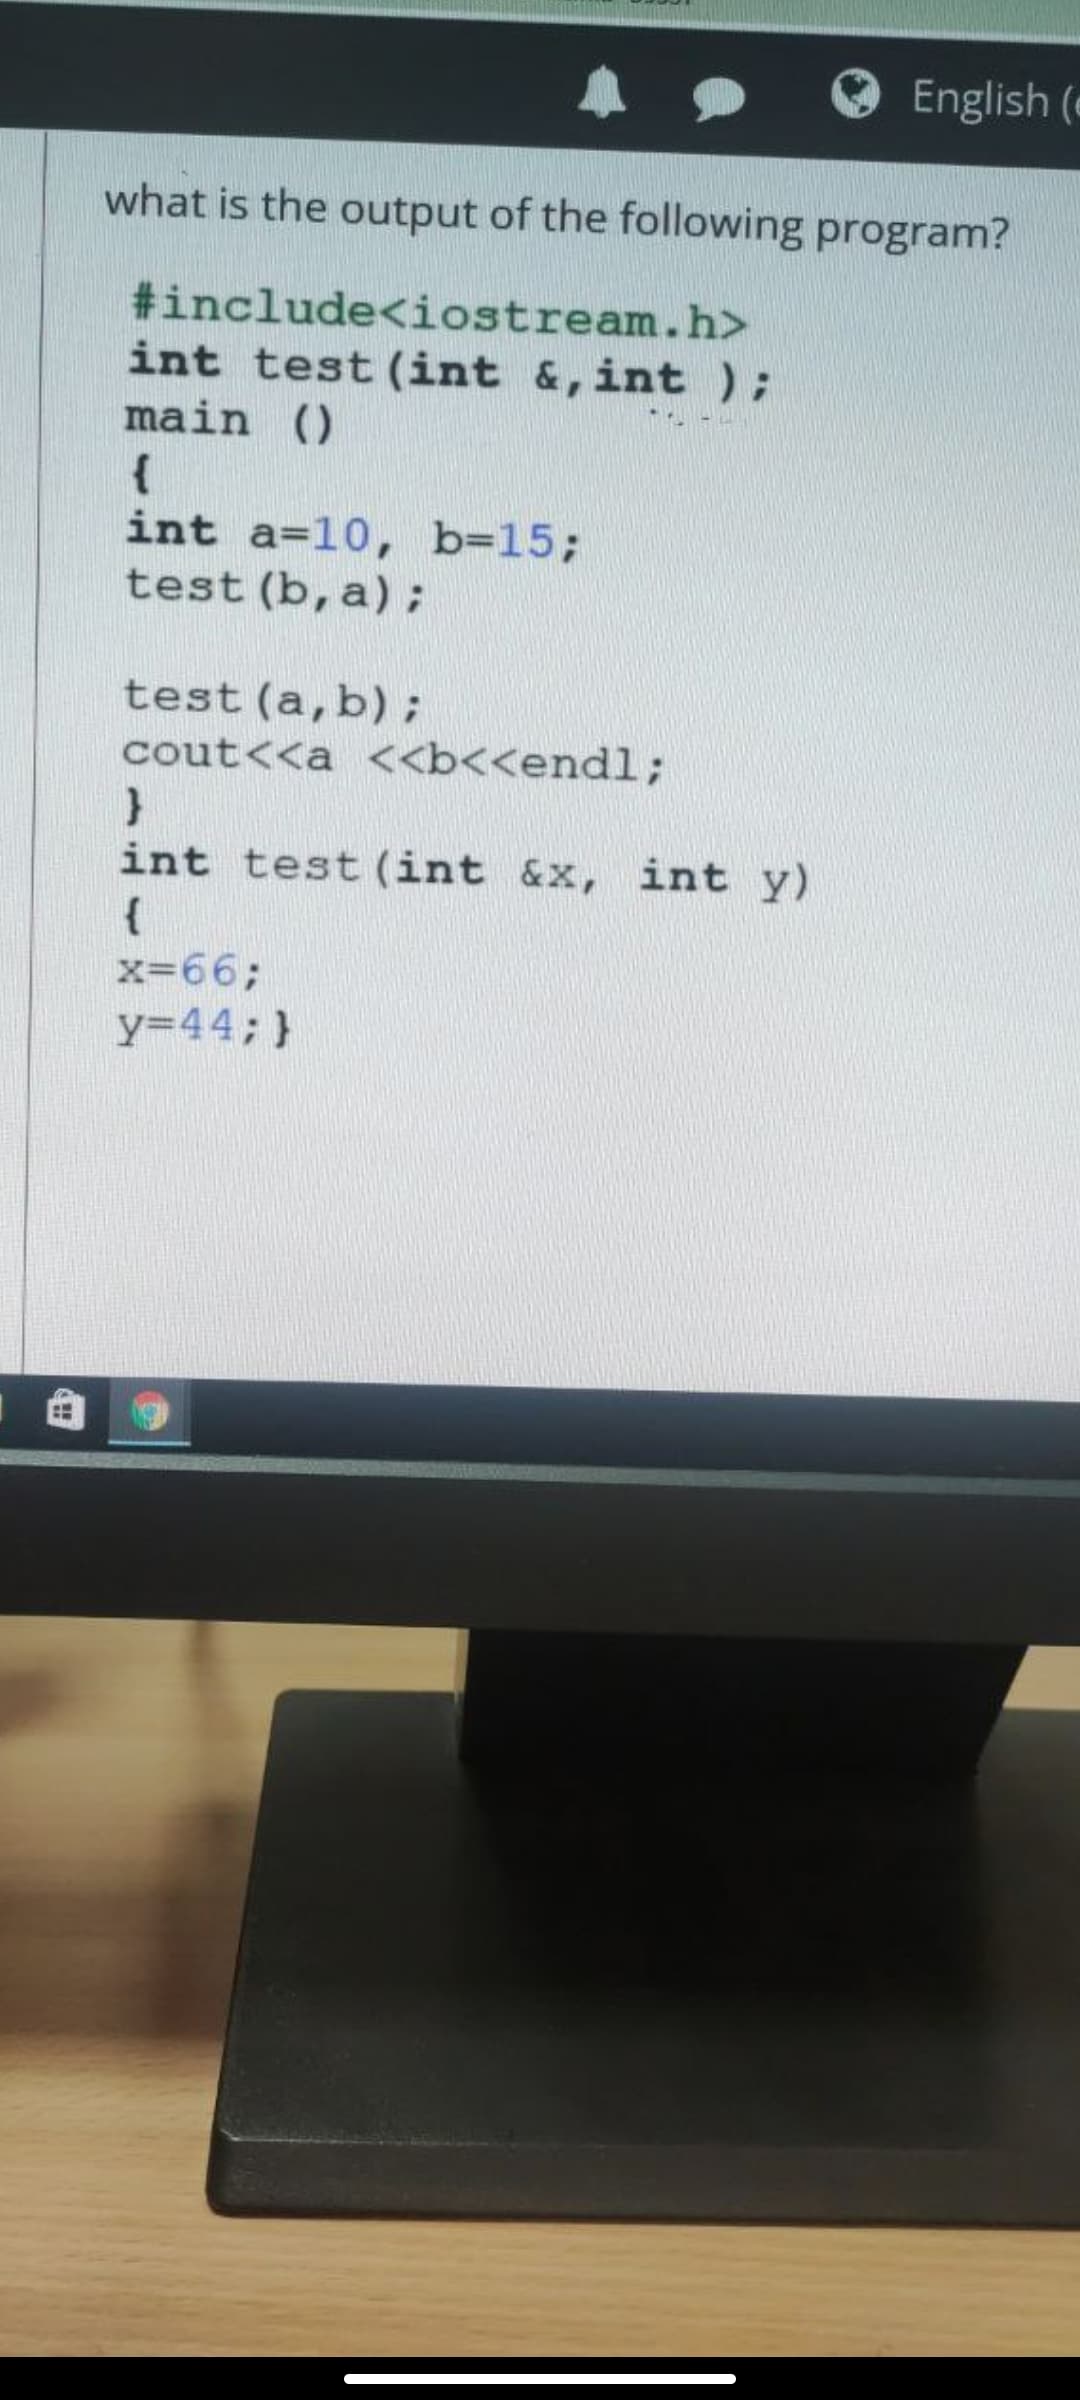 English (e
what is the output of the following program?
#include<iostream.h>
int test (int &, int);
main ()
{
int a=10, b=15;
test (b, a);
test (a,b);
cout<<a <<b<<endl;
int test (int &x, int y)
{
x=66;
y=44; }
